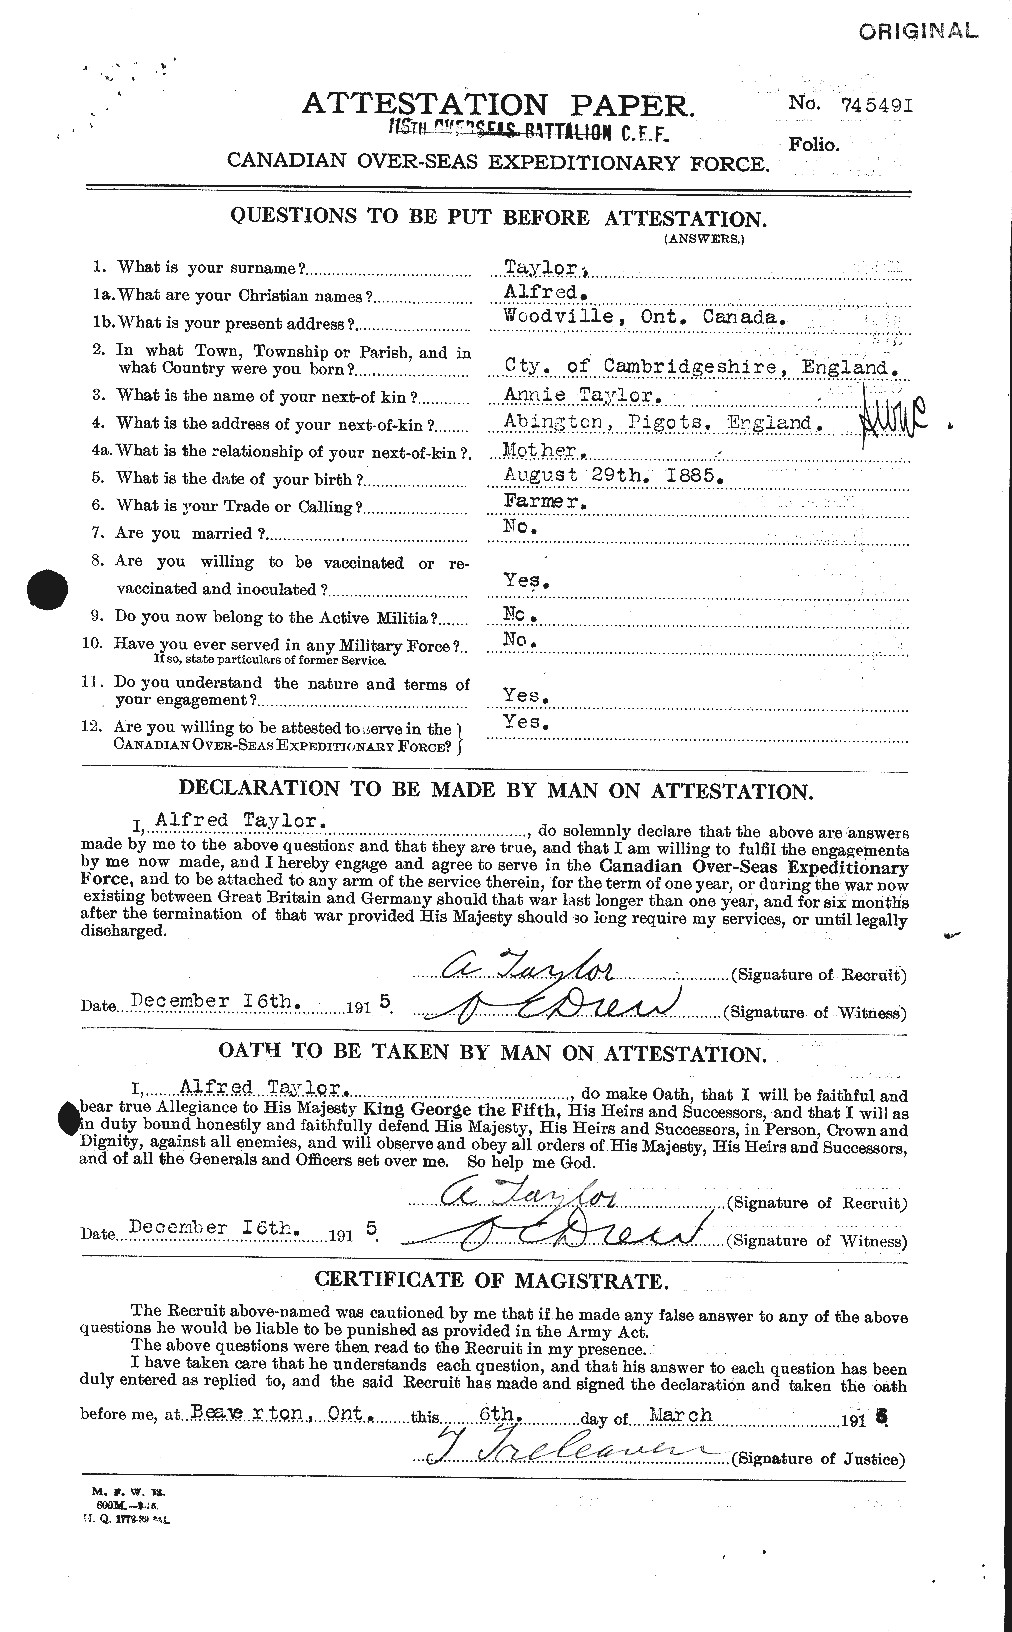 Personnel Records of the First World War - CEF 626173a